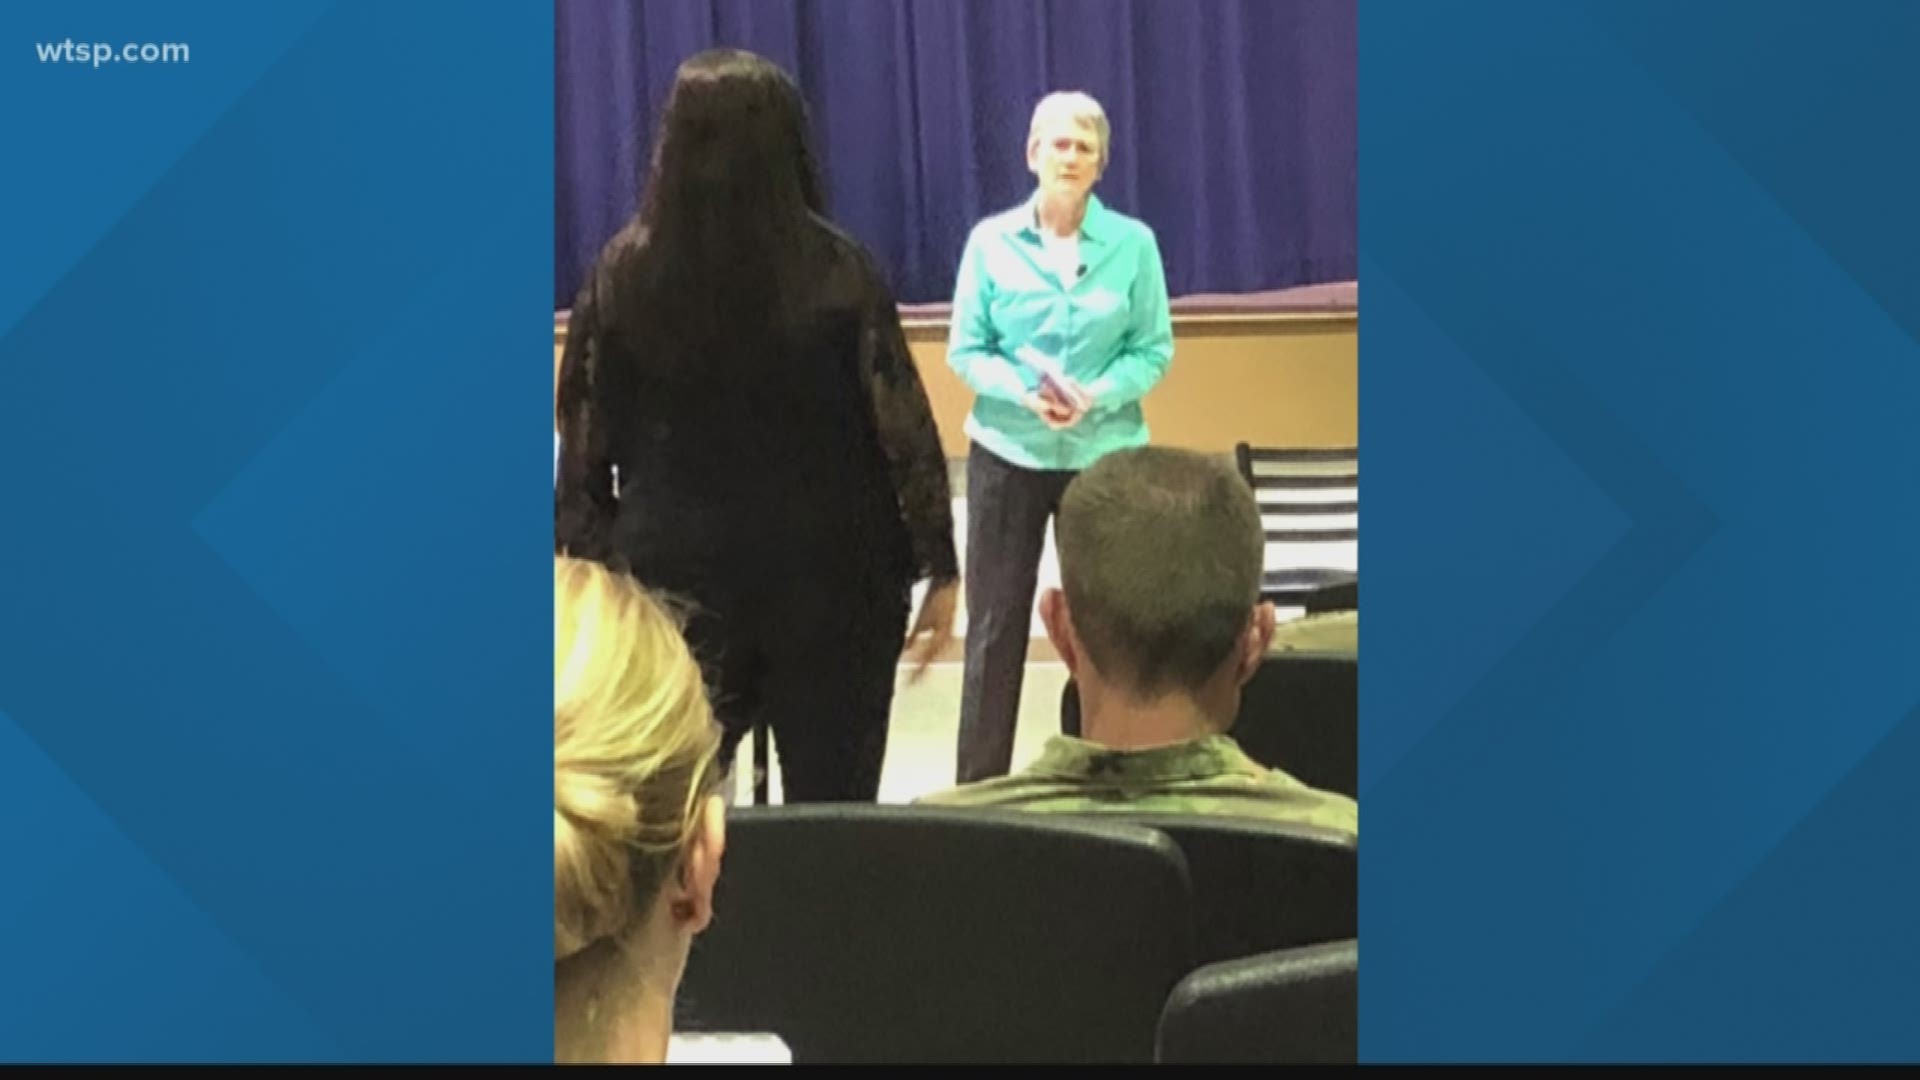 The visit by U.S. Air Force Sec. Heather Wilson follows complaints of mold, rats, and other problems with privately managed  housing at MacDill Air Force Base.

 
Several people who’ve had issues and complained about the living conditions had an opportunity to speak face to face with Wilson during a listening session which lasted about two hours.